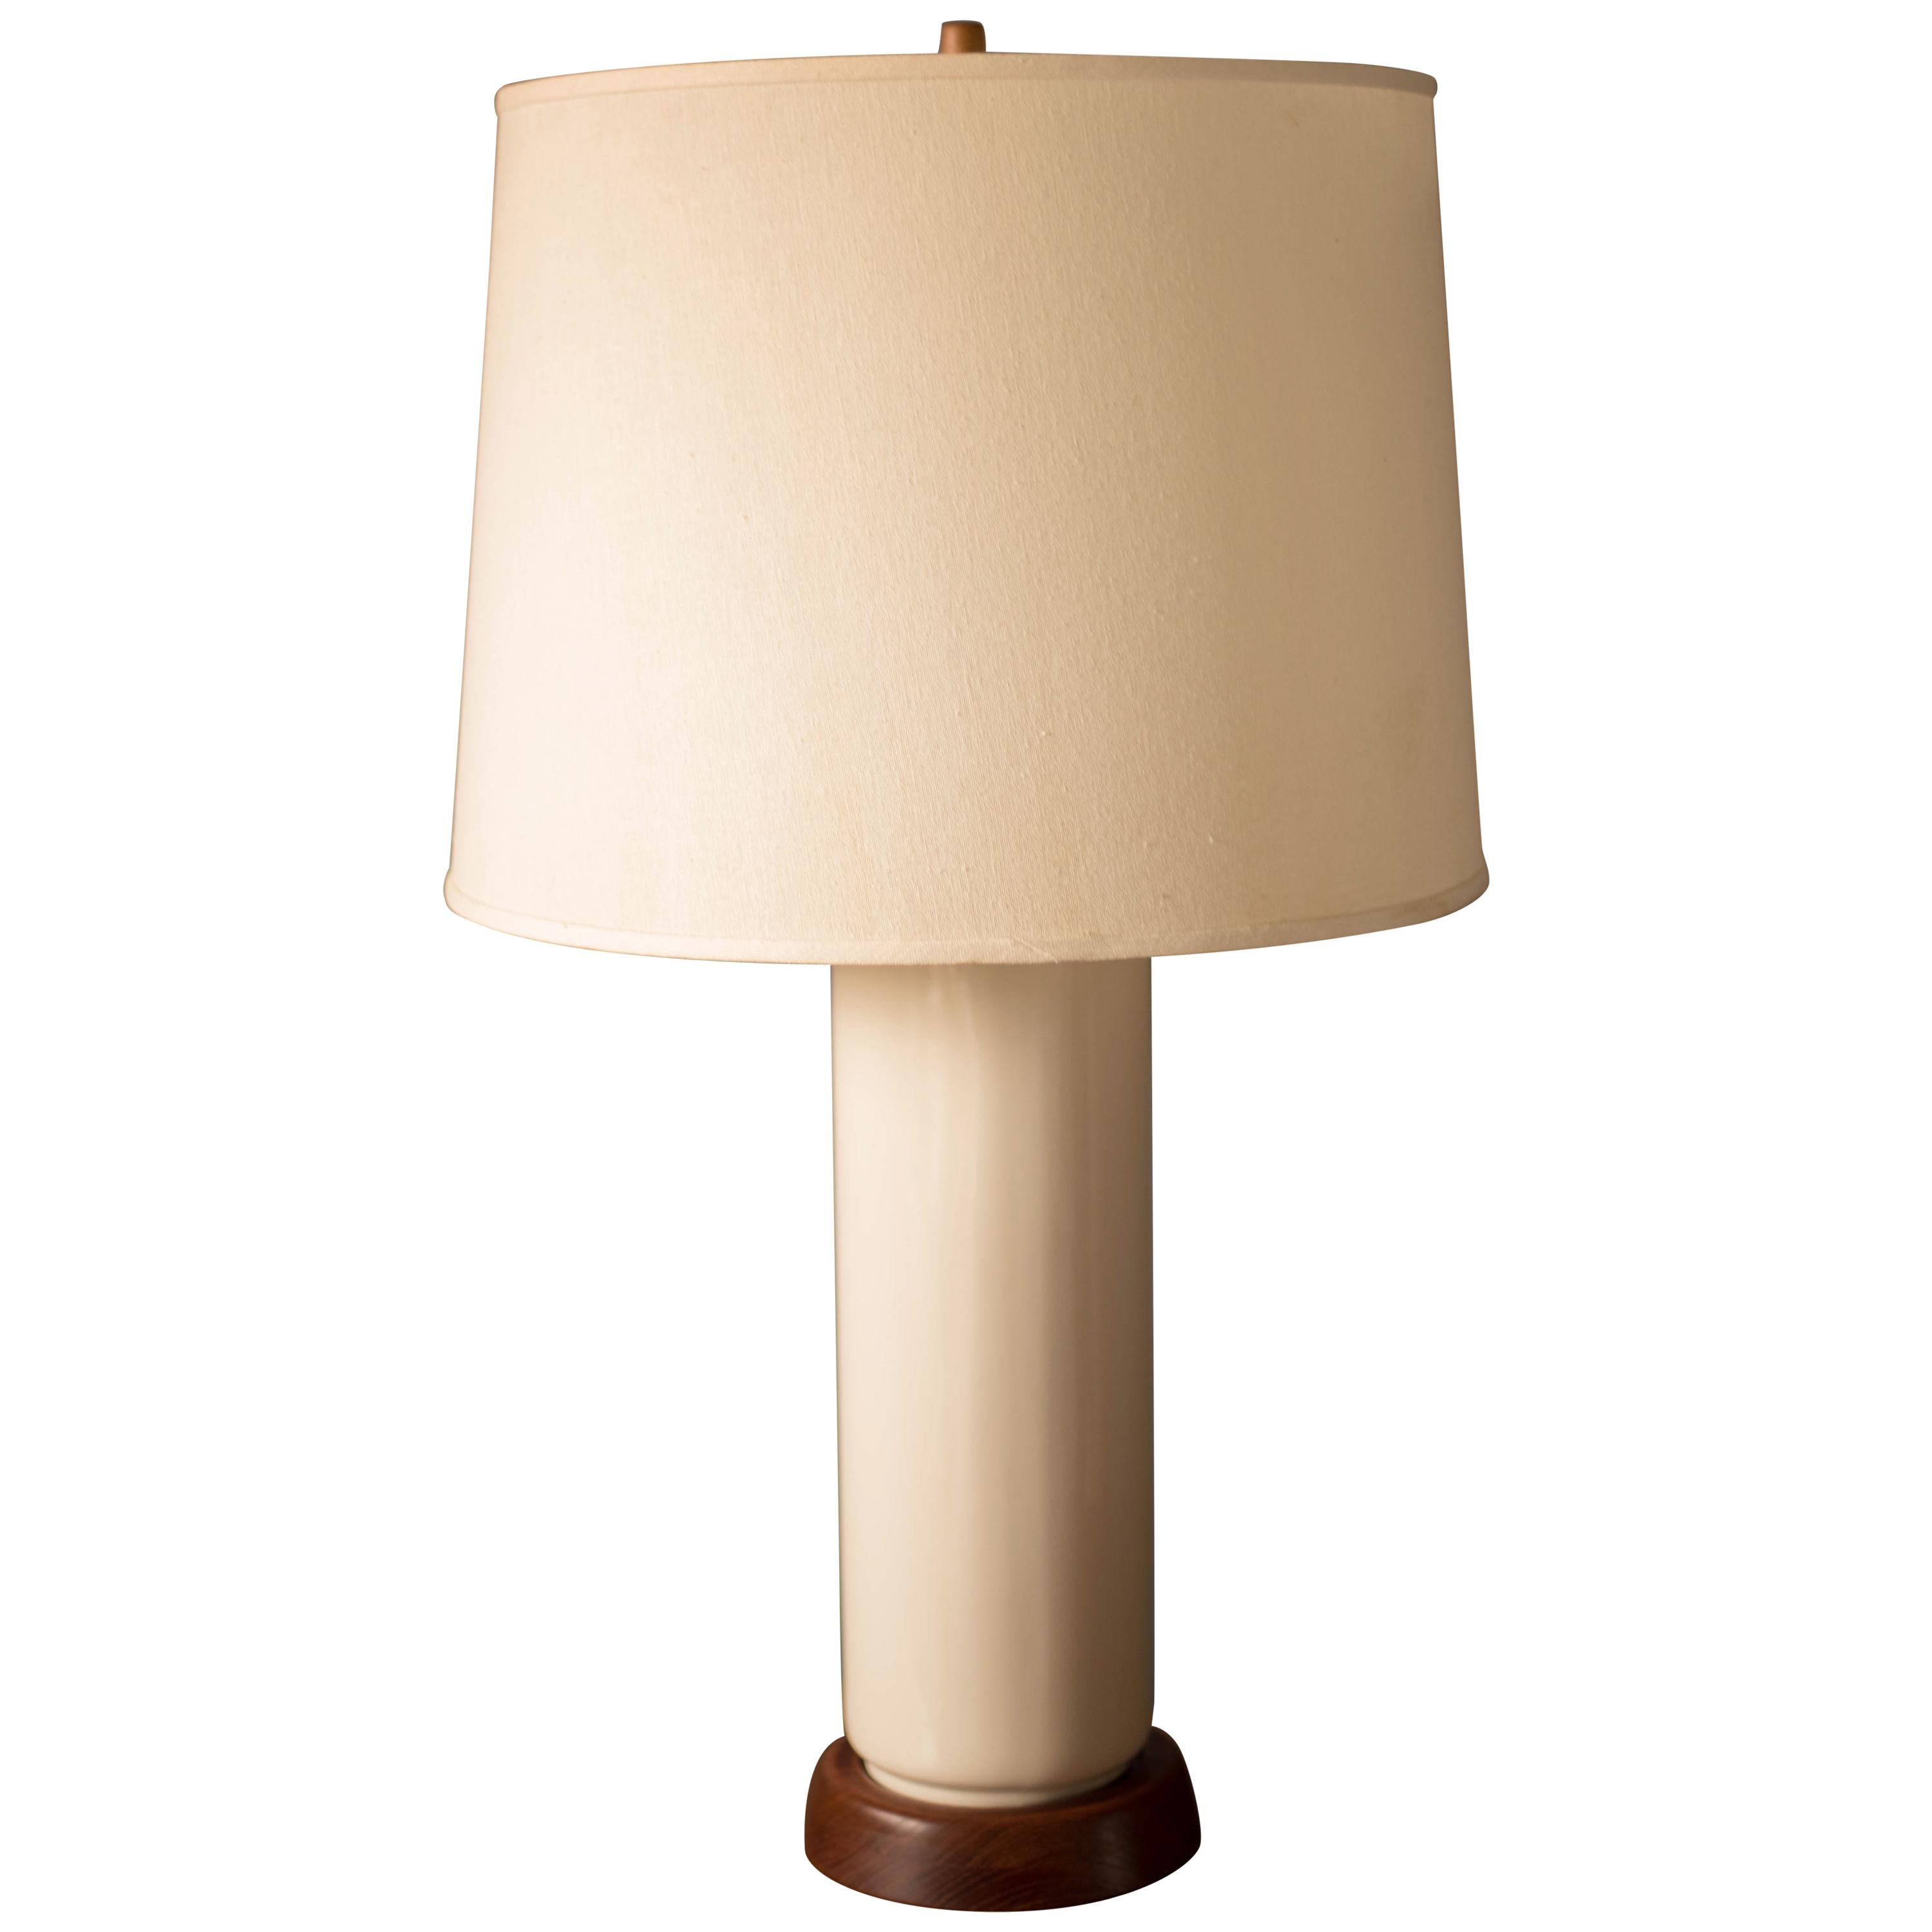 Vintage White Ceramic and Walnut Table Lamp For Sale